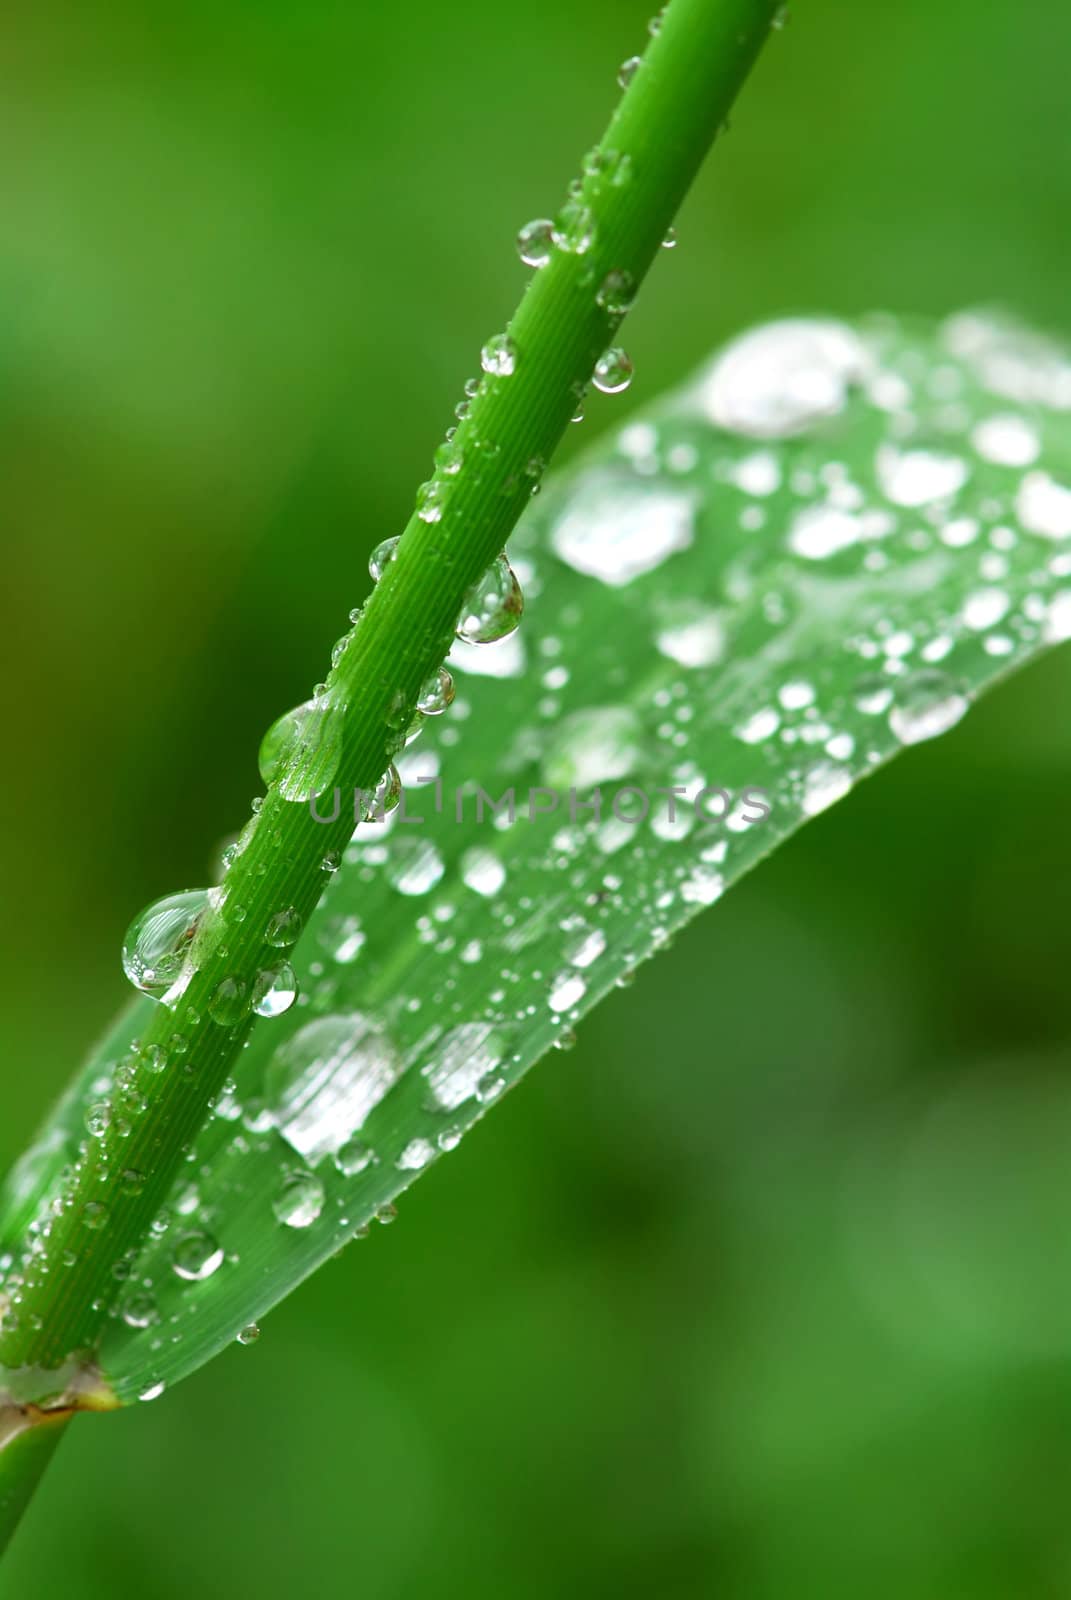 Big water drops on a green grass blade and stem, macro